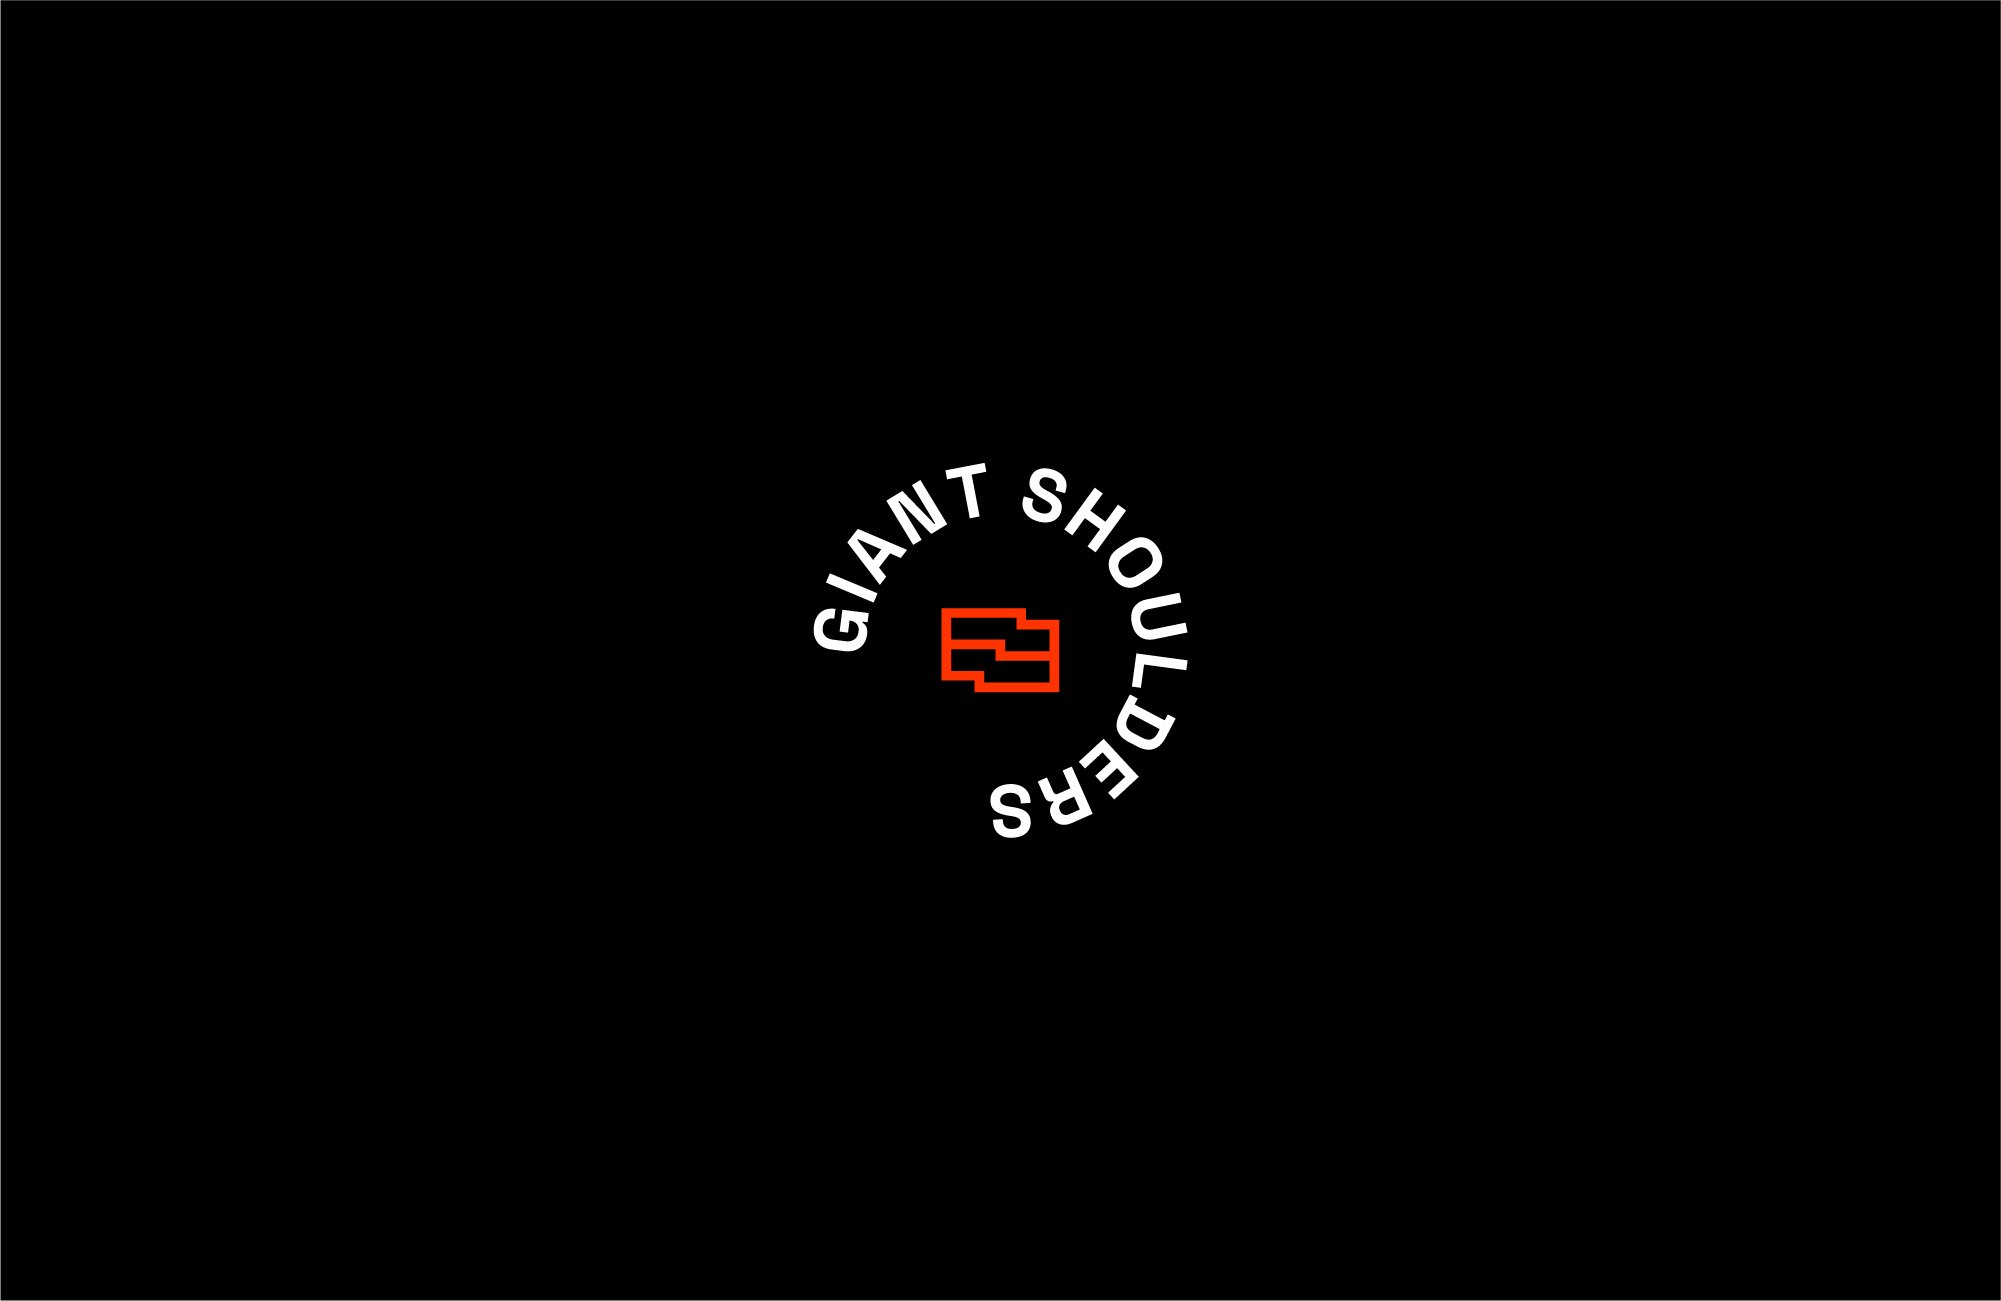 more-ours-giant-shoulders-logo1.jpg